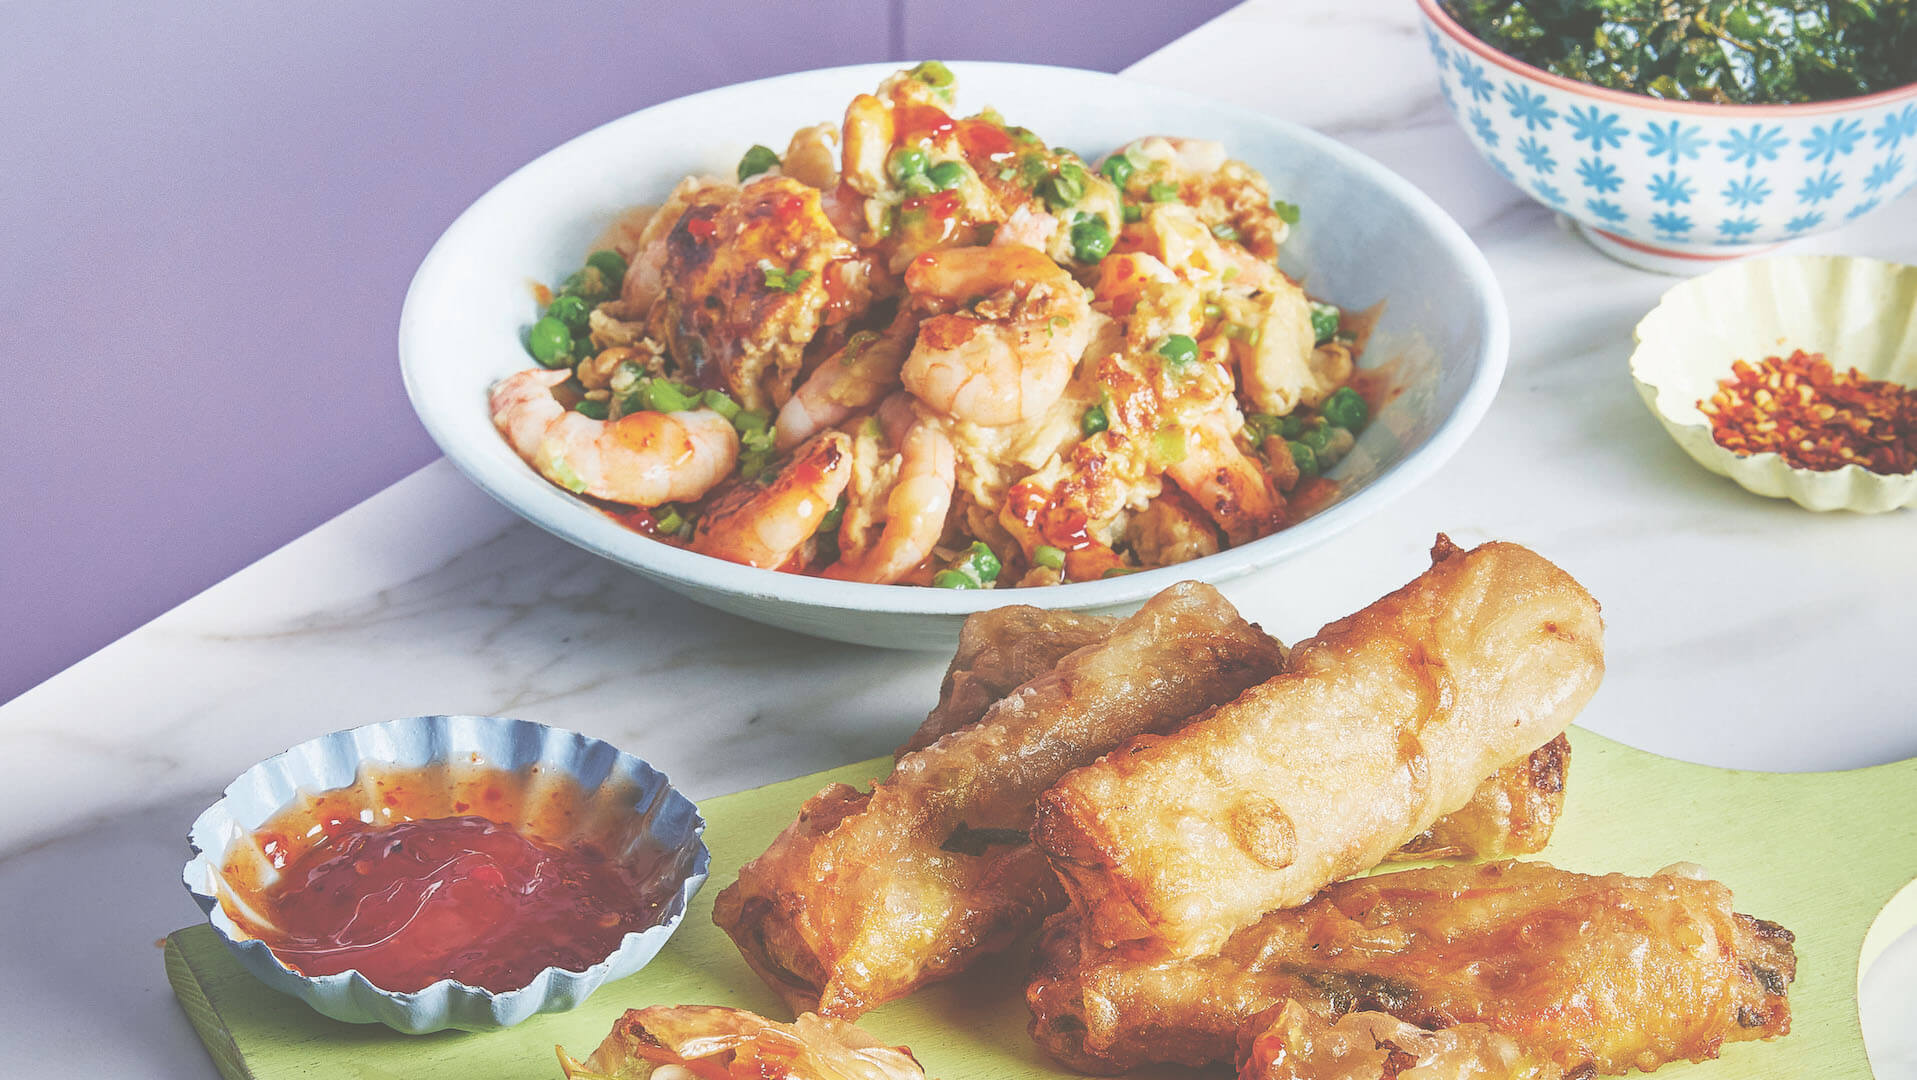 becky excell's gluten-free prawn or chicken foo yung recipe